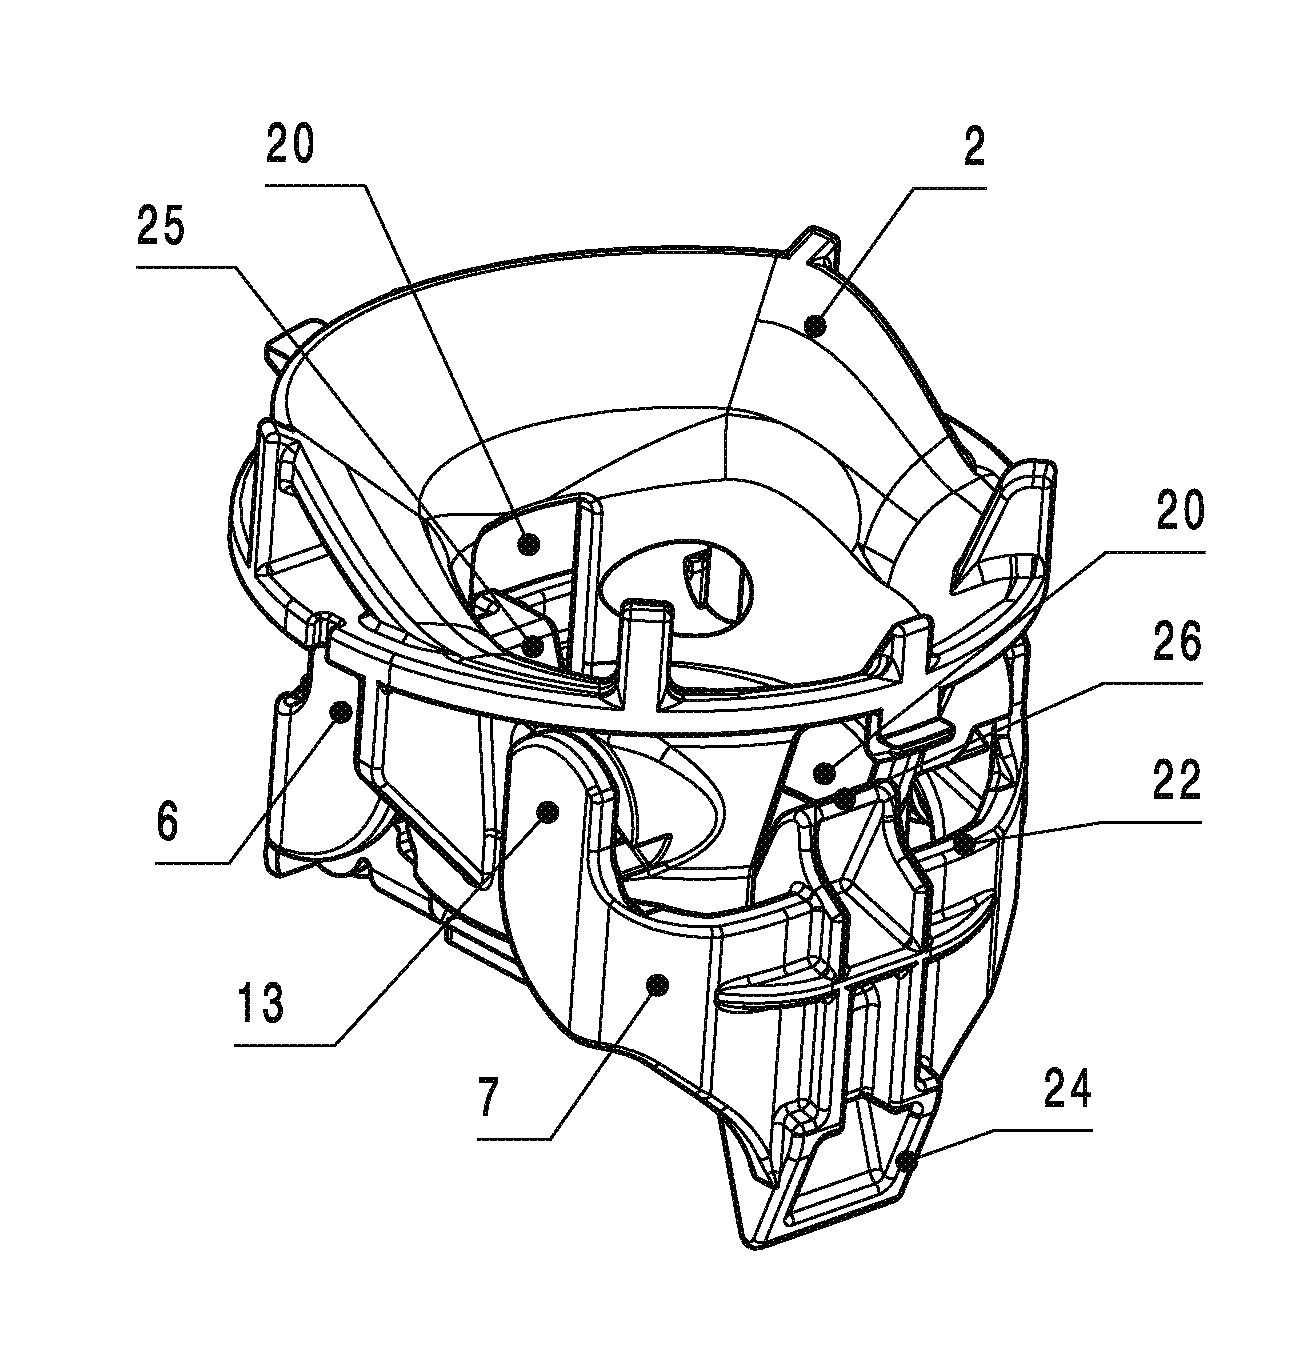 Filler neck for the fuel tank of a motor vehicle with selective opening